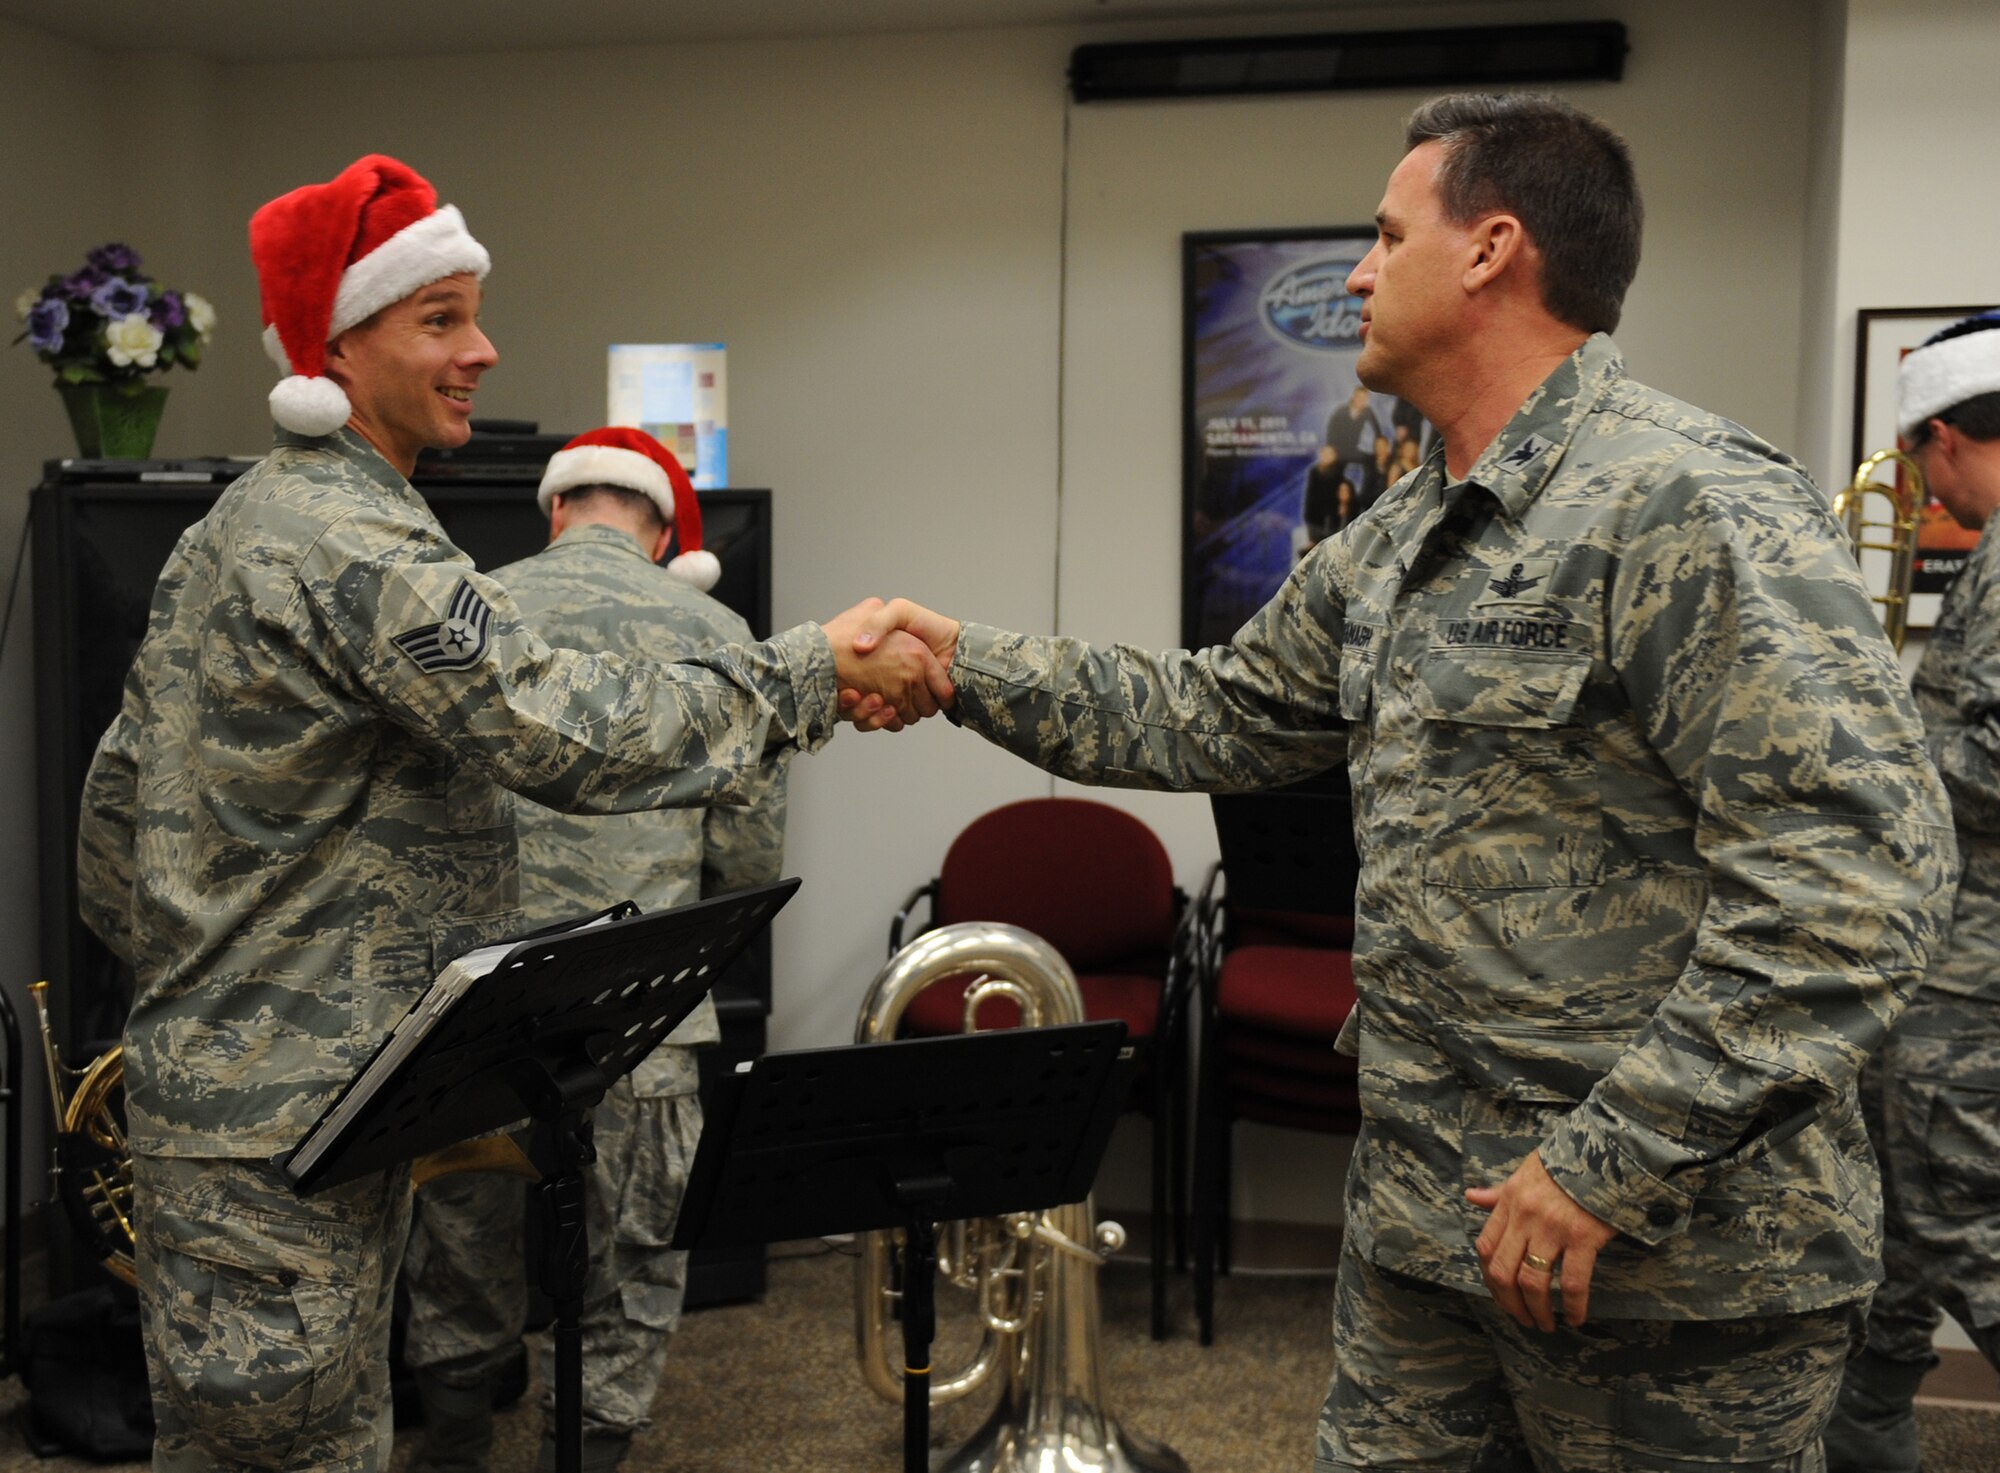 Col. Kevin Cavanagh, 940th Wing commander, shakes hands with Staff Sgt. Robbie Mayes, Band of the Golden West French horn player at Beale Air Force Base, Calif., Dec. 13, 2012. The band performed holiday music at the wing’s headquarters. (U.S. Air Force photo by Staff Sgt. Robert M. Trujillo/Released)